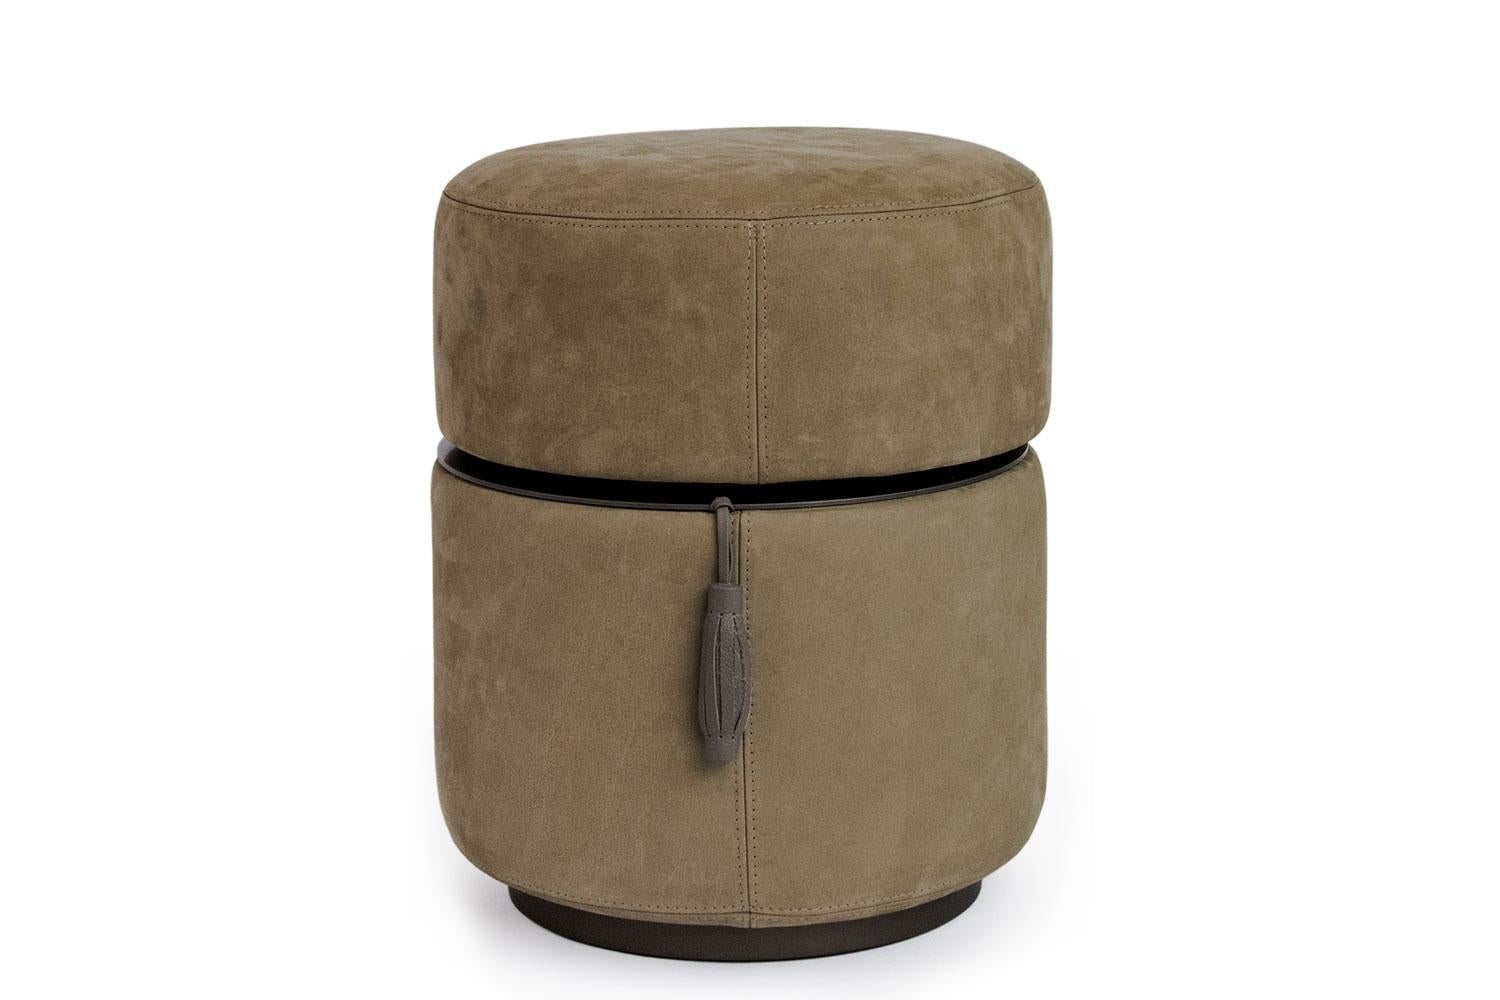 Giorgetti’s Otto pouf ottoman plays on the surprise effect: the padded foam seat reveals a removable, swivel table in painted steel. These comfortable and attractive seats are upholstered in olive brown Nubuck leather. Each pouf is enriched by a